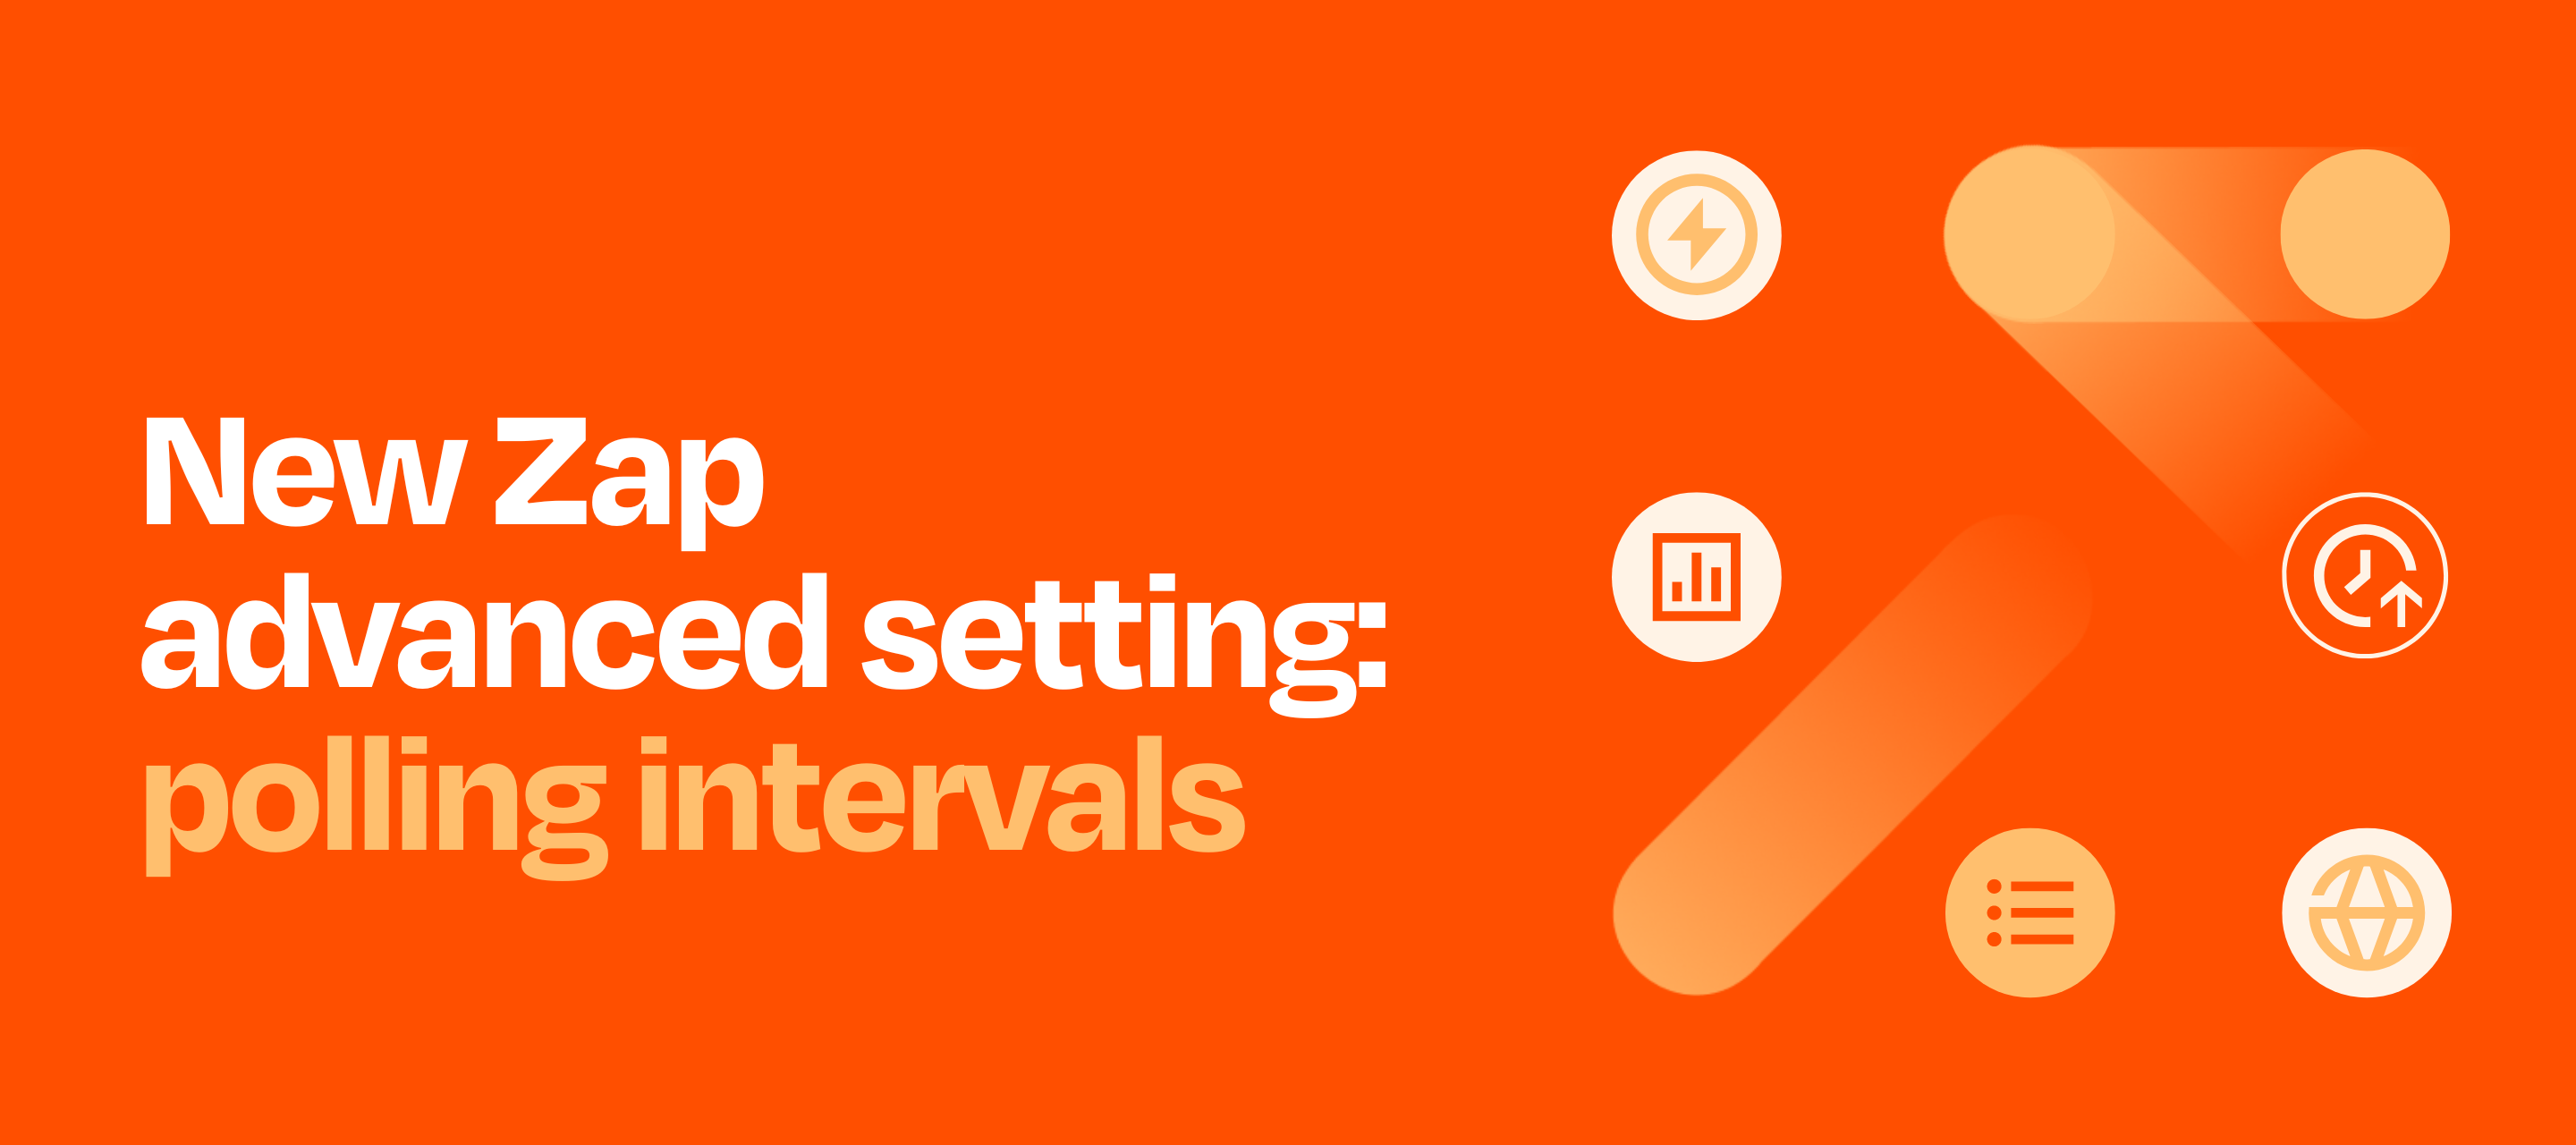 New Zap advanced setting: polling intervals